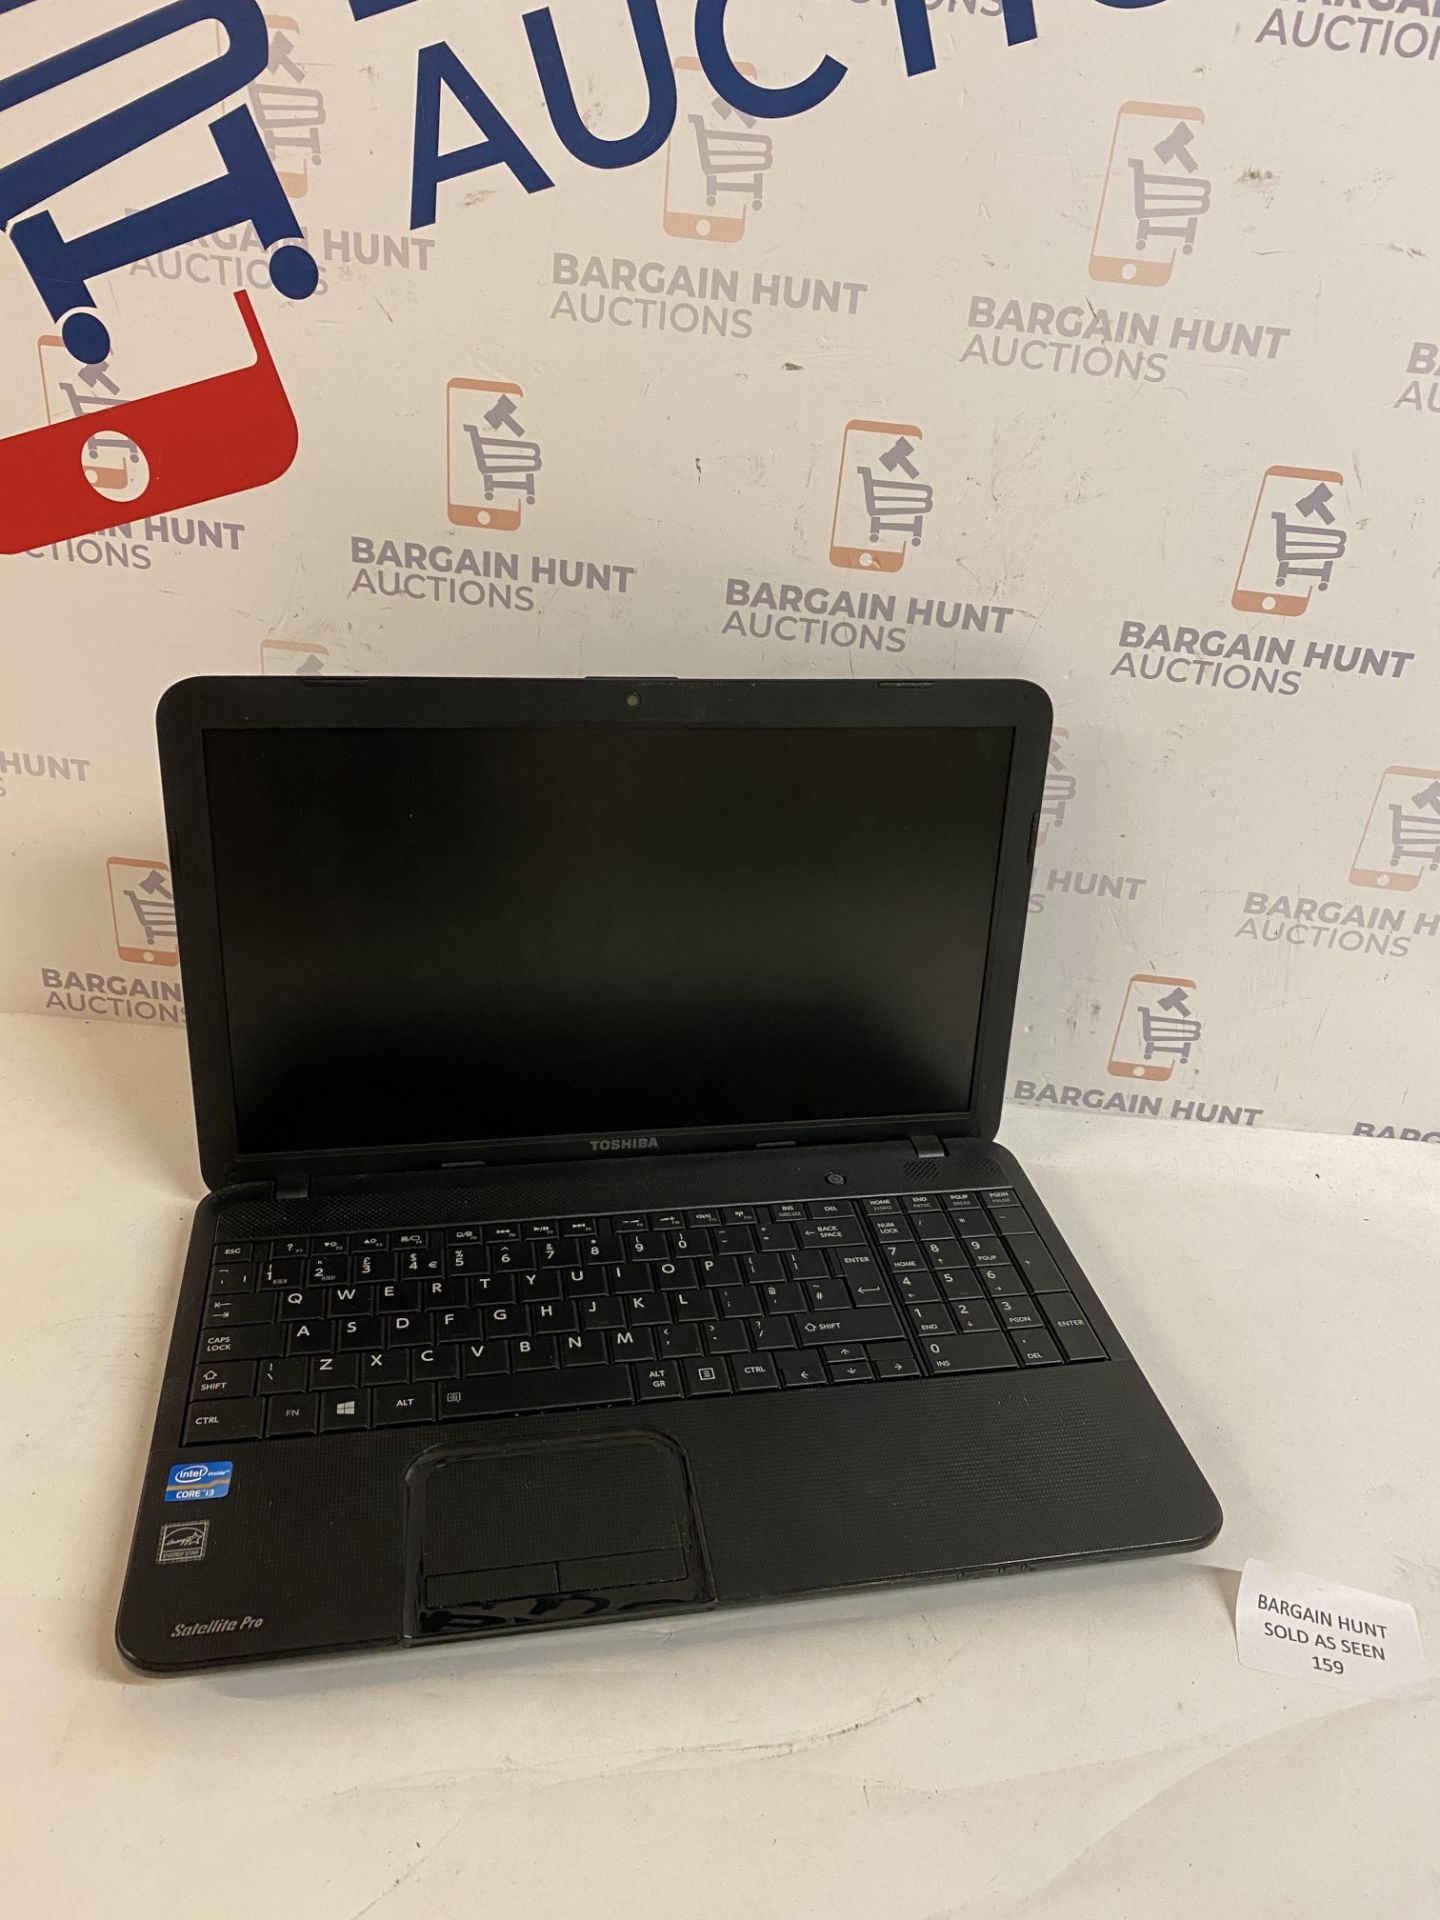 Toshiba Satellite Pro C850 15.6 inch Laptop (no power cable/ charger, cannot test)